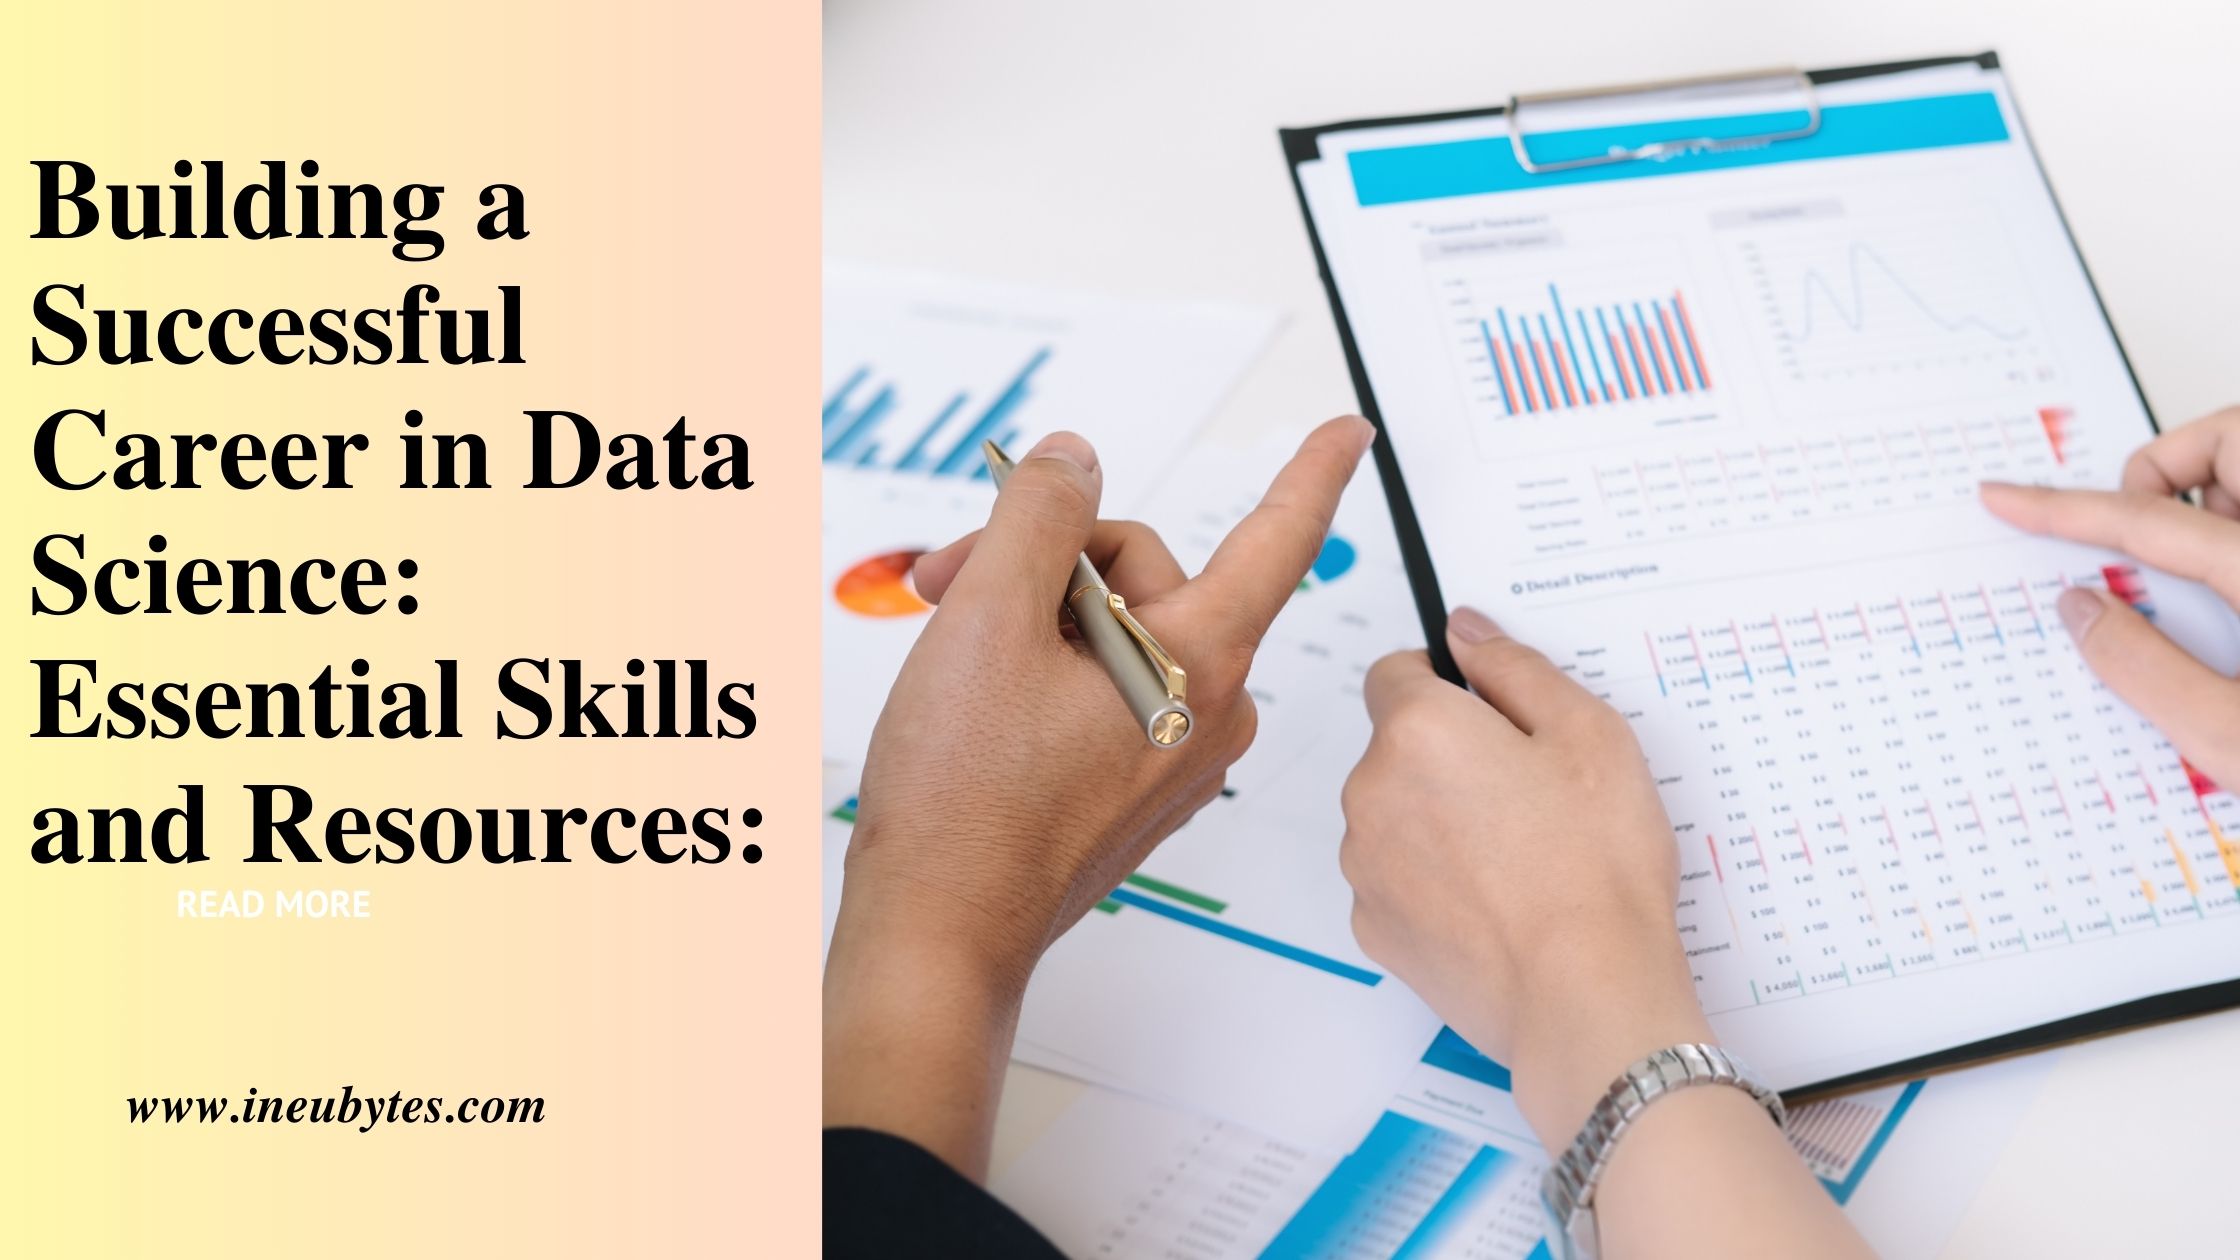 Building a Successful Career in Data Science: Essential Skills and Resources: